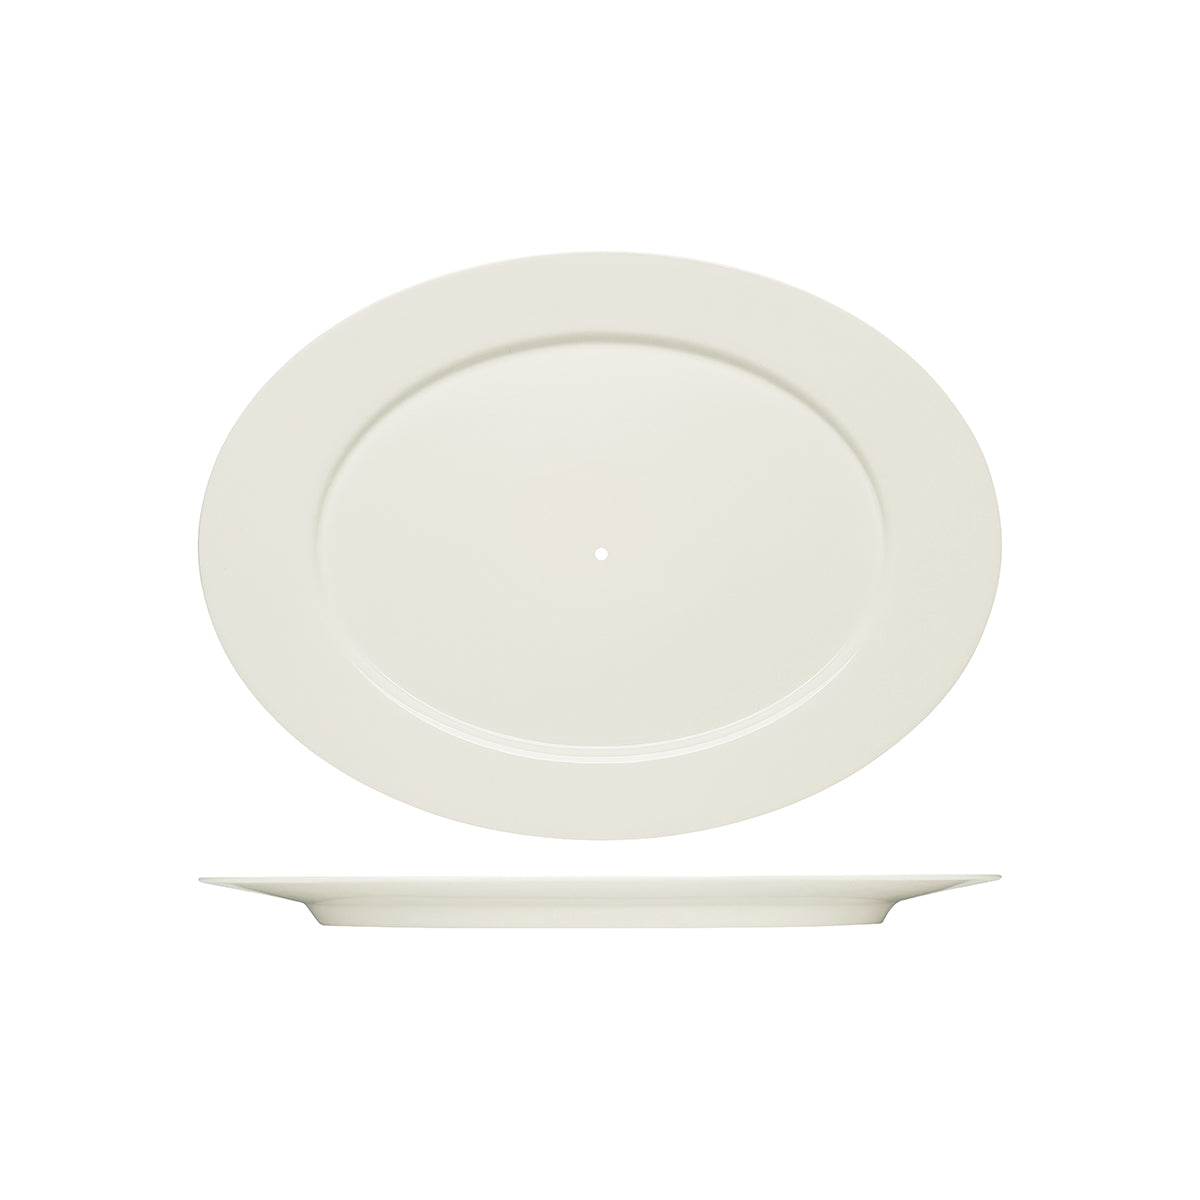 BHS6697205 Bauscher Bauscher Purity Oval Platter with Wide Rim 380x272mm To Suit Serving Stand Tomkin Australia Hospitality Supplies